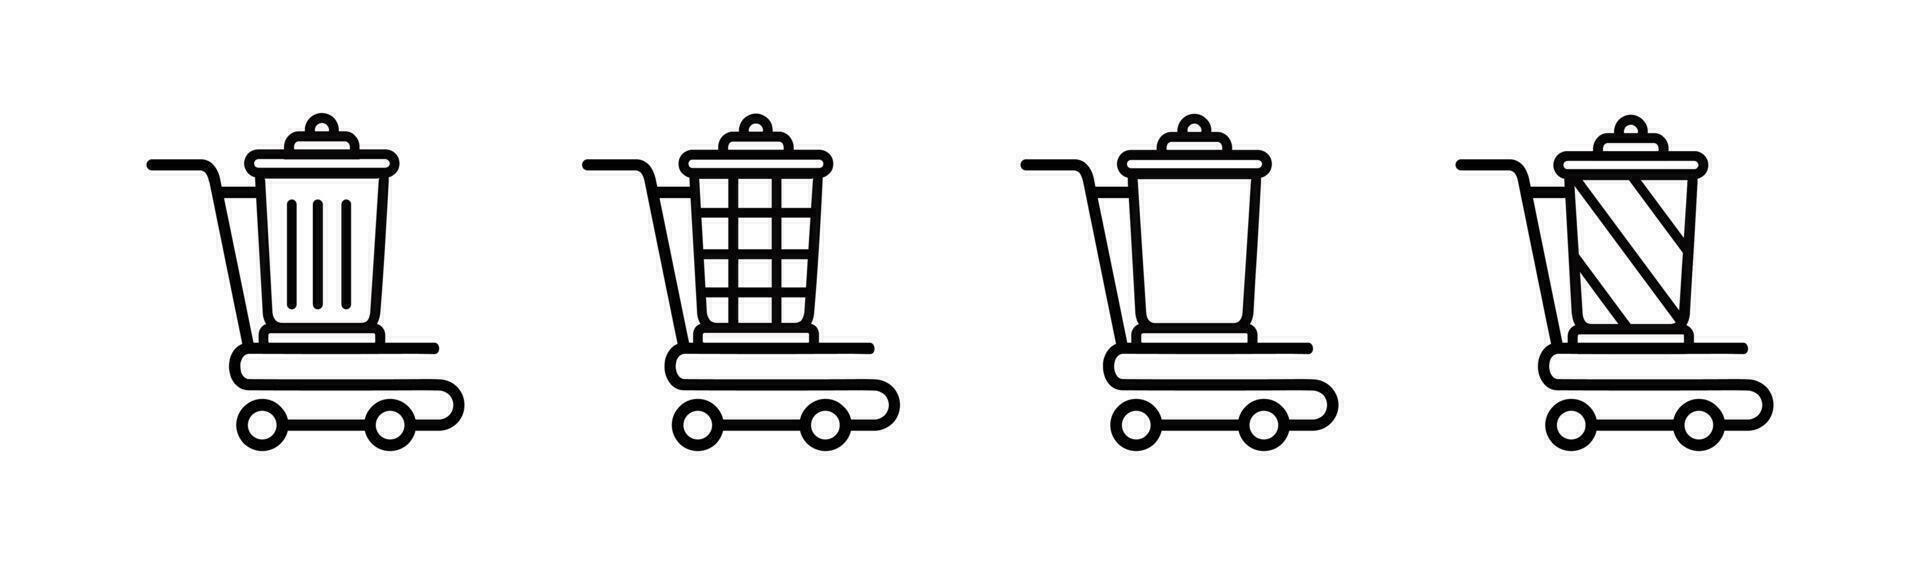 trash trolley  open icon Vector illustration design, icon set  Garbage or rubbish collection.